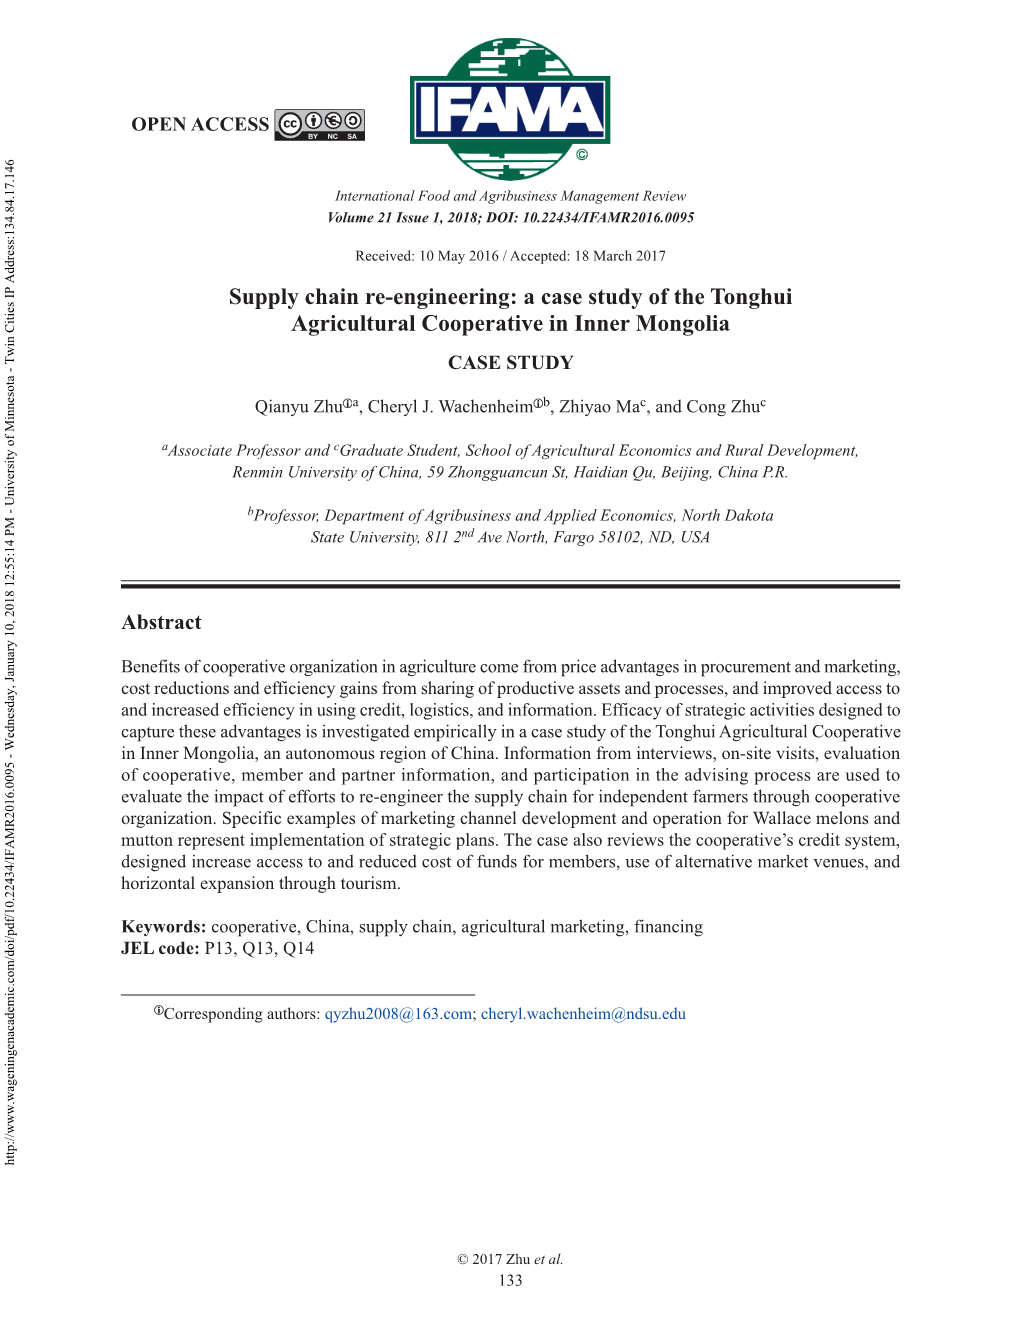 Supply Chain Re-Engineering: a Case Study of the Tonghui Agricultural Cooperative in Inner Mongolia CASE STUDY